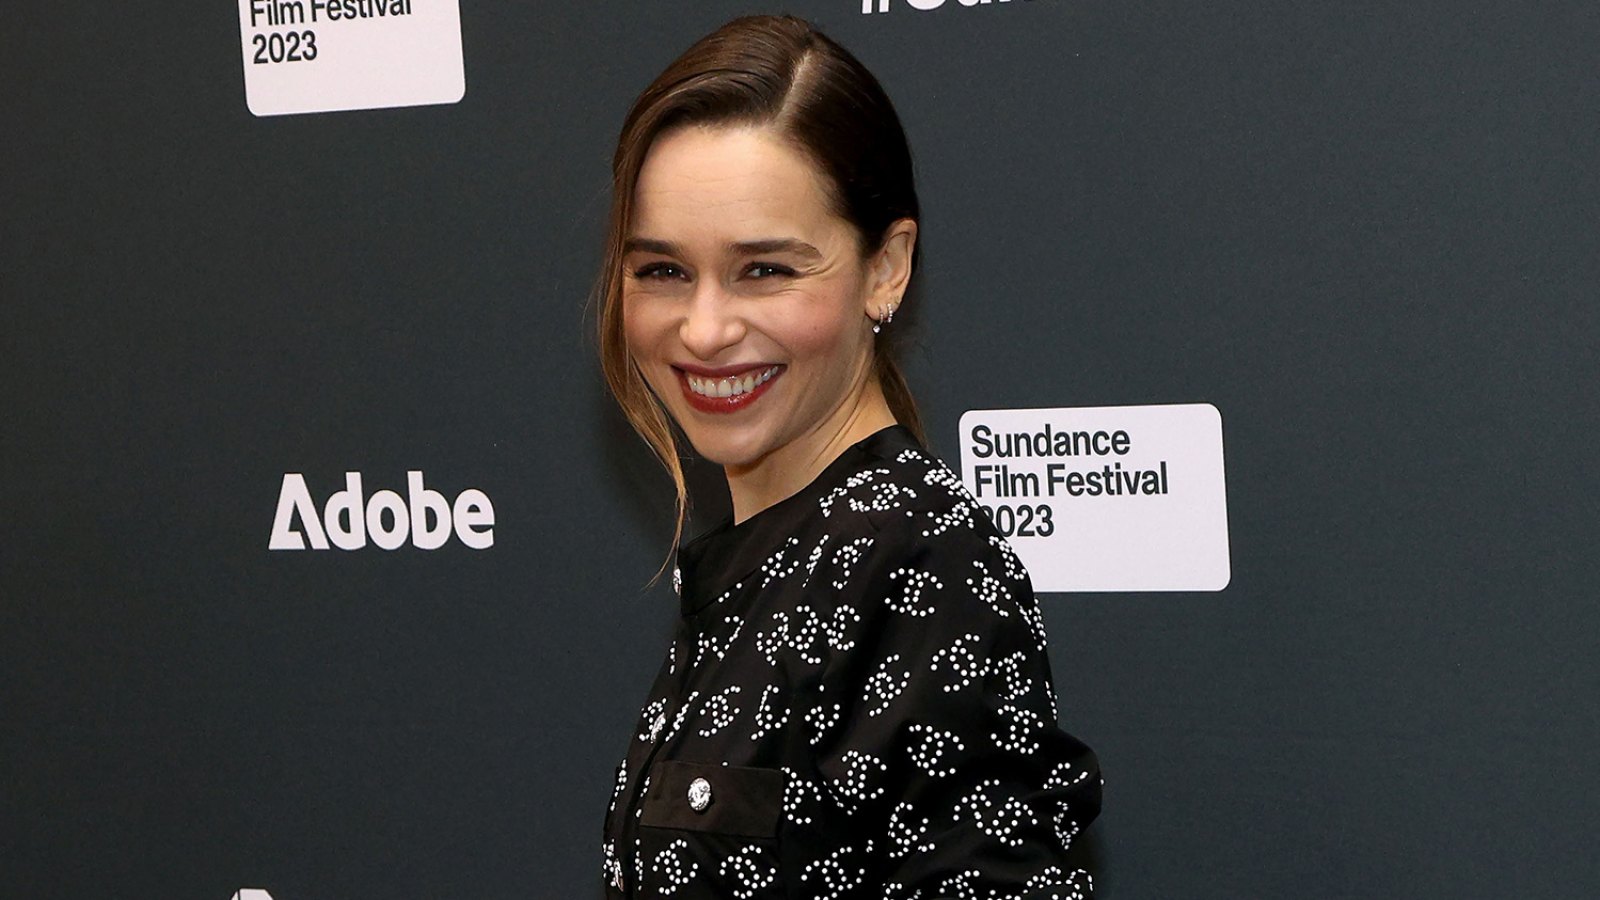 Game of Thrones star Emilia Clarke won't watch House of the Dragon